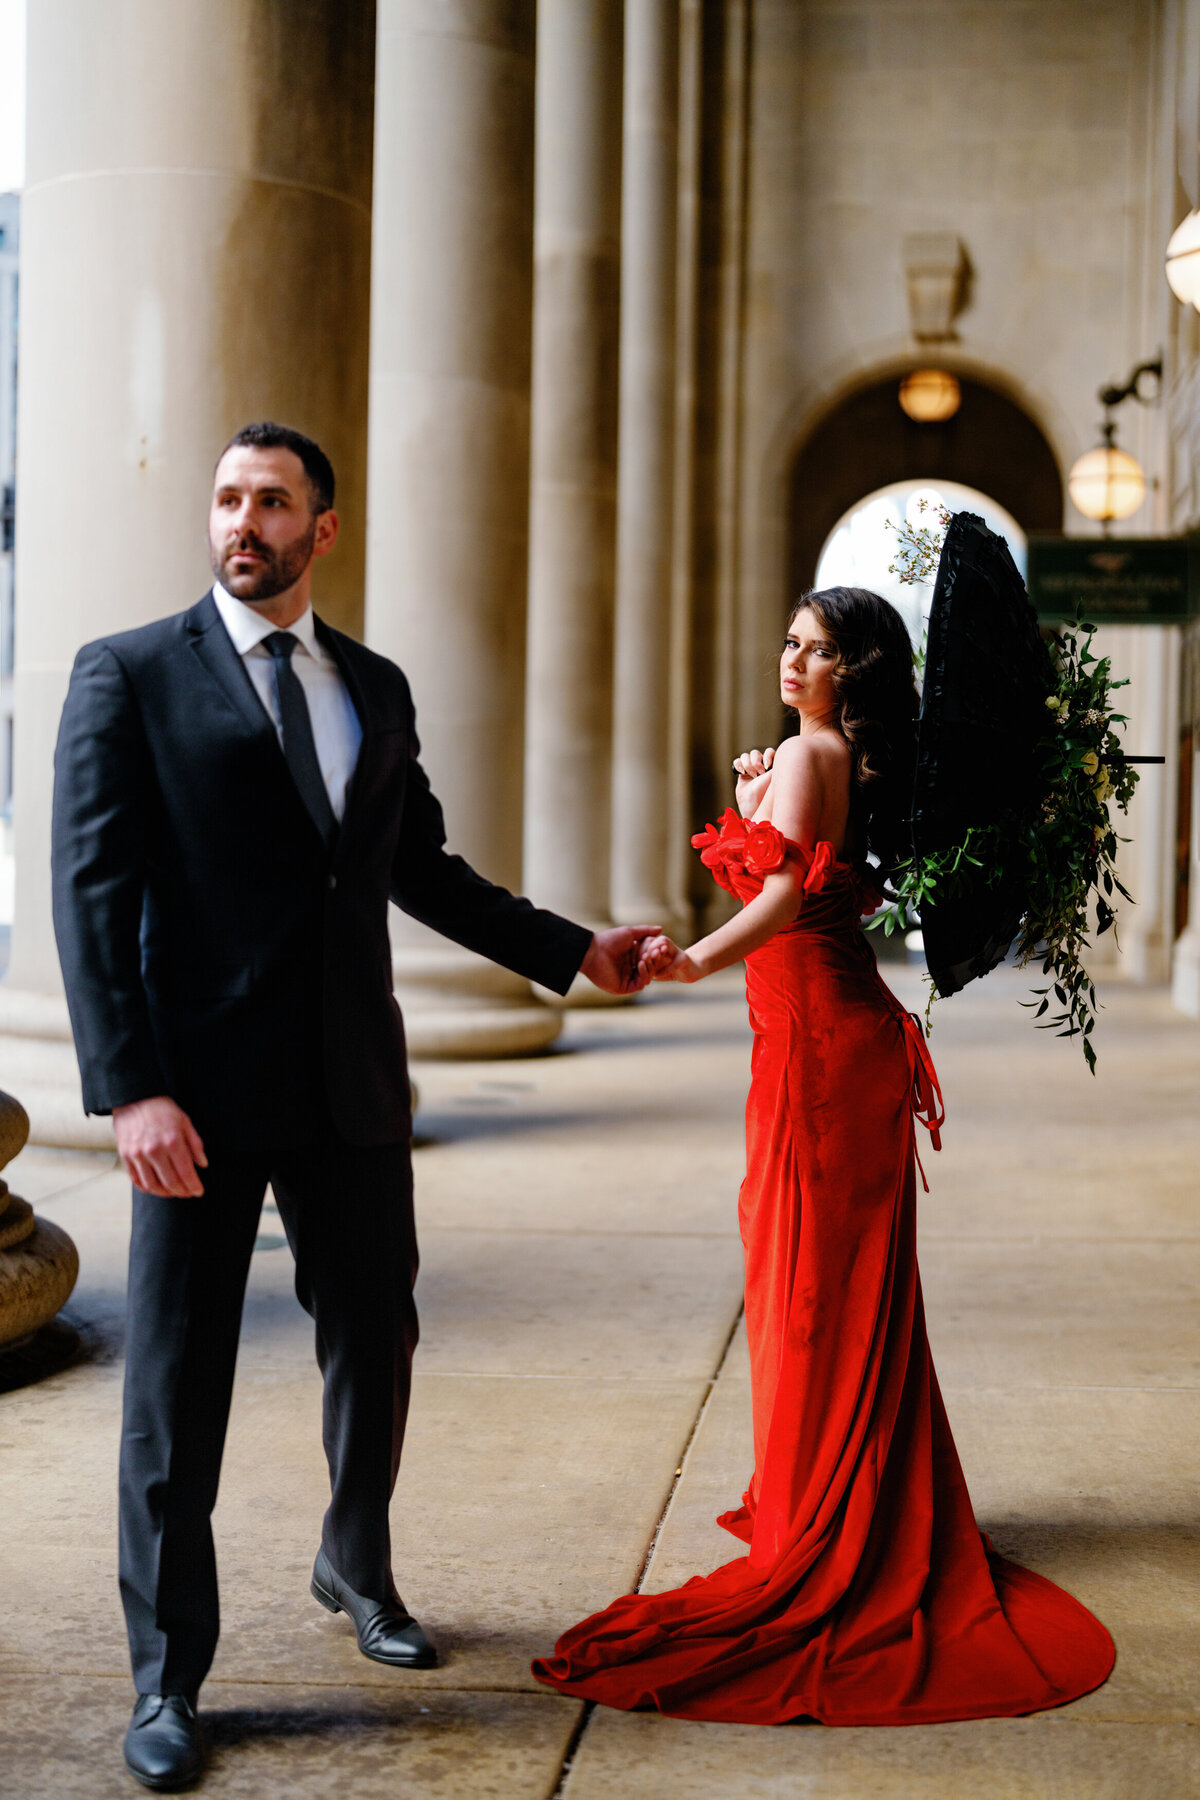 Aspen-Avenue-Chicago-Wedding-Photographer-Union-Station-Chicago-Theater-Engagement-Session-Timeless-Romantic-Red-Dress-Editorial-Stemming-From-Love-Bry-Jean-Artistry-The-Bridal-Collective-True-to-color-Luxury-FAV-53